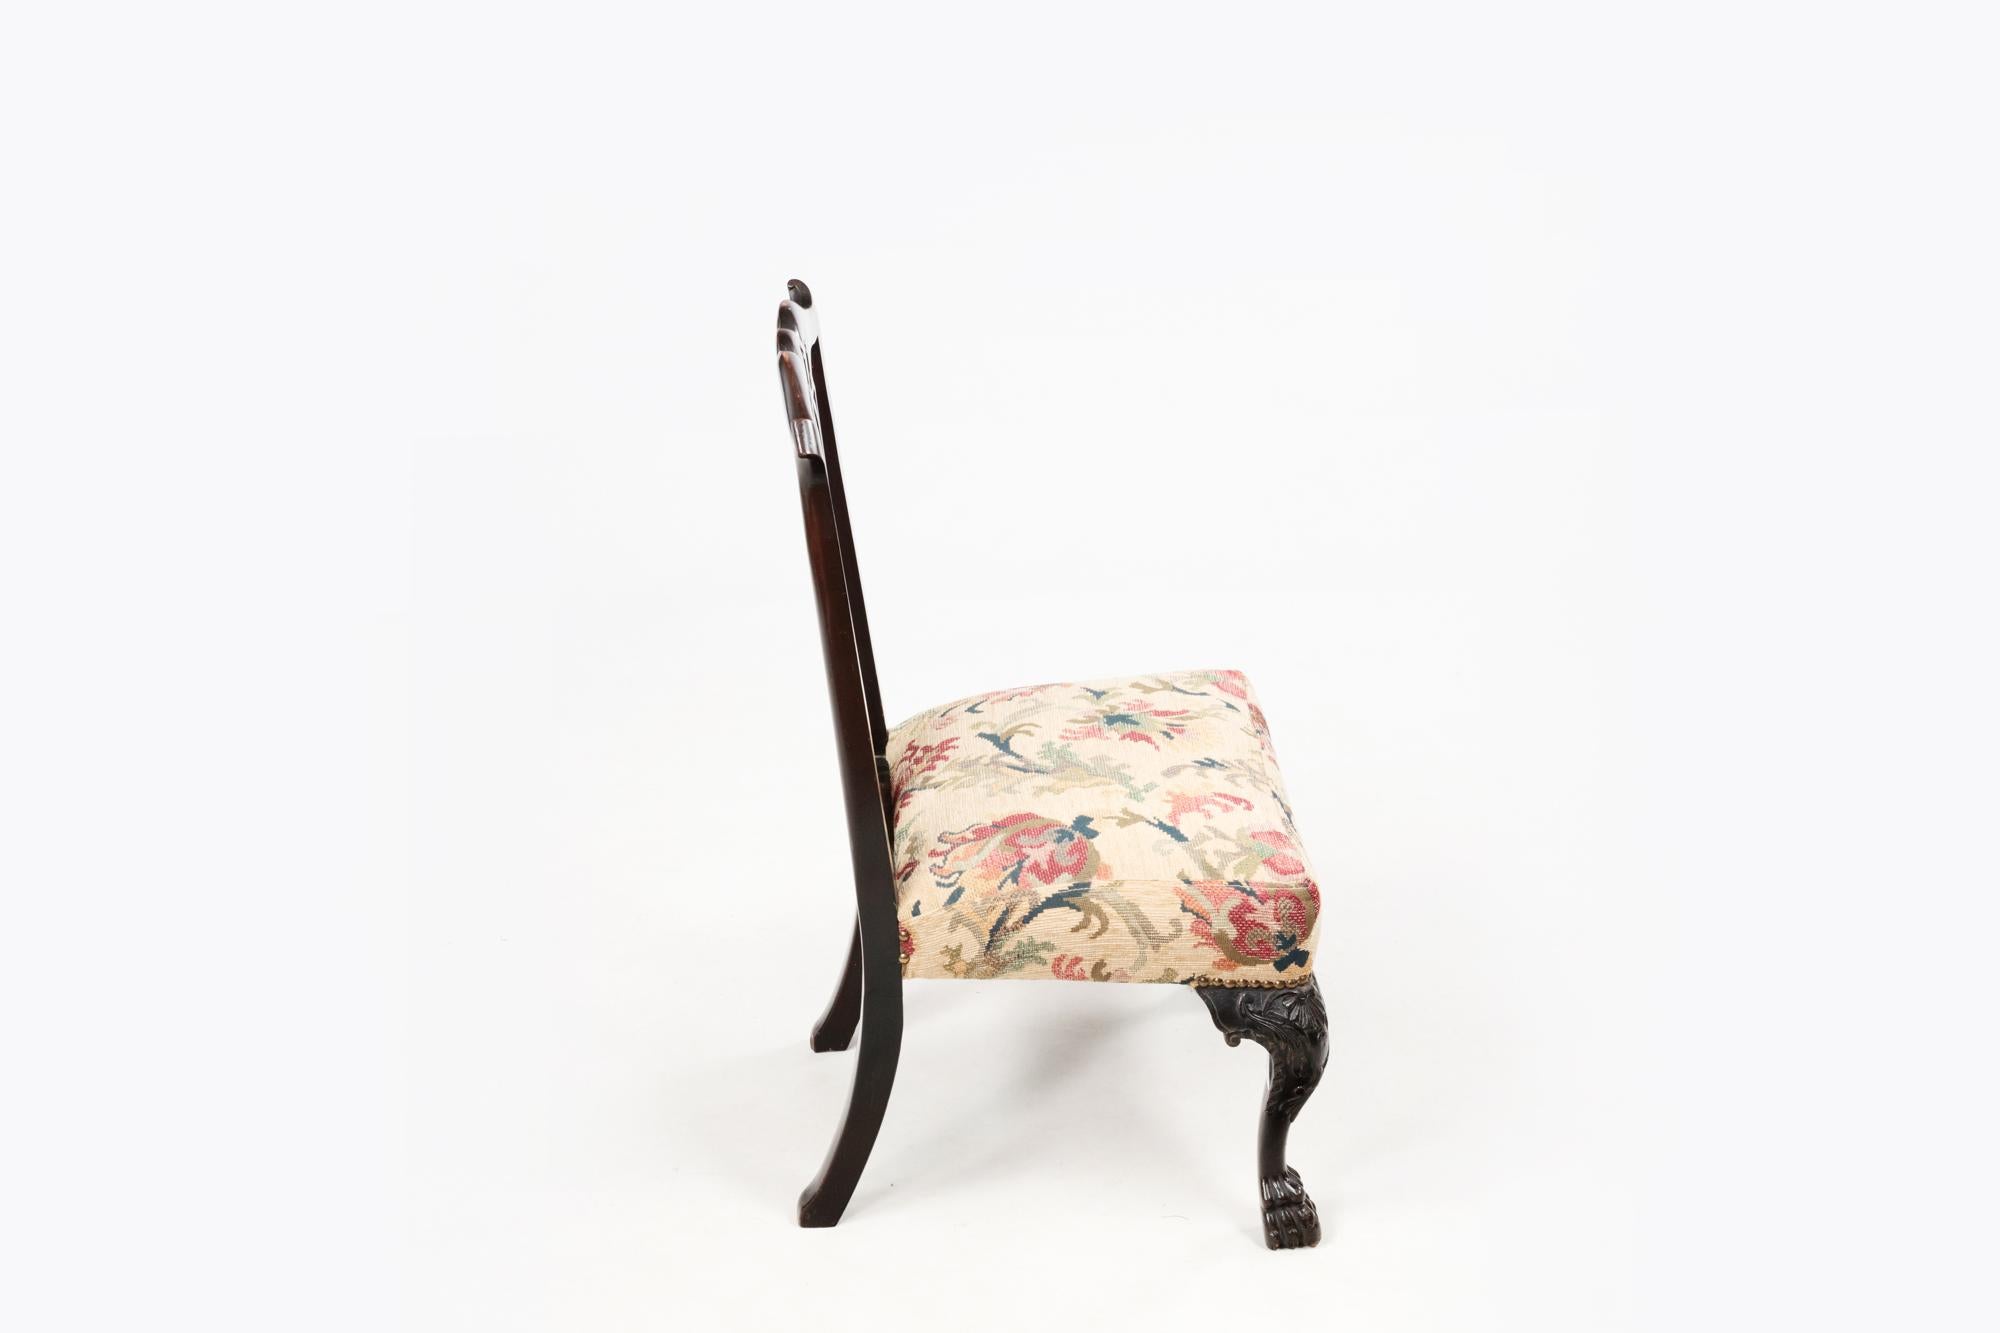 A pair of neat-sized 18th century Irish miniature chairs attributed to Butler of Dublin. Featuring a bow-shaped top rail, pierced tapering splat, simple back legs. To the front highly decorated front cabriole legs terminate with hairy paw feet.